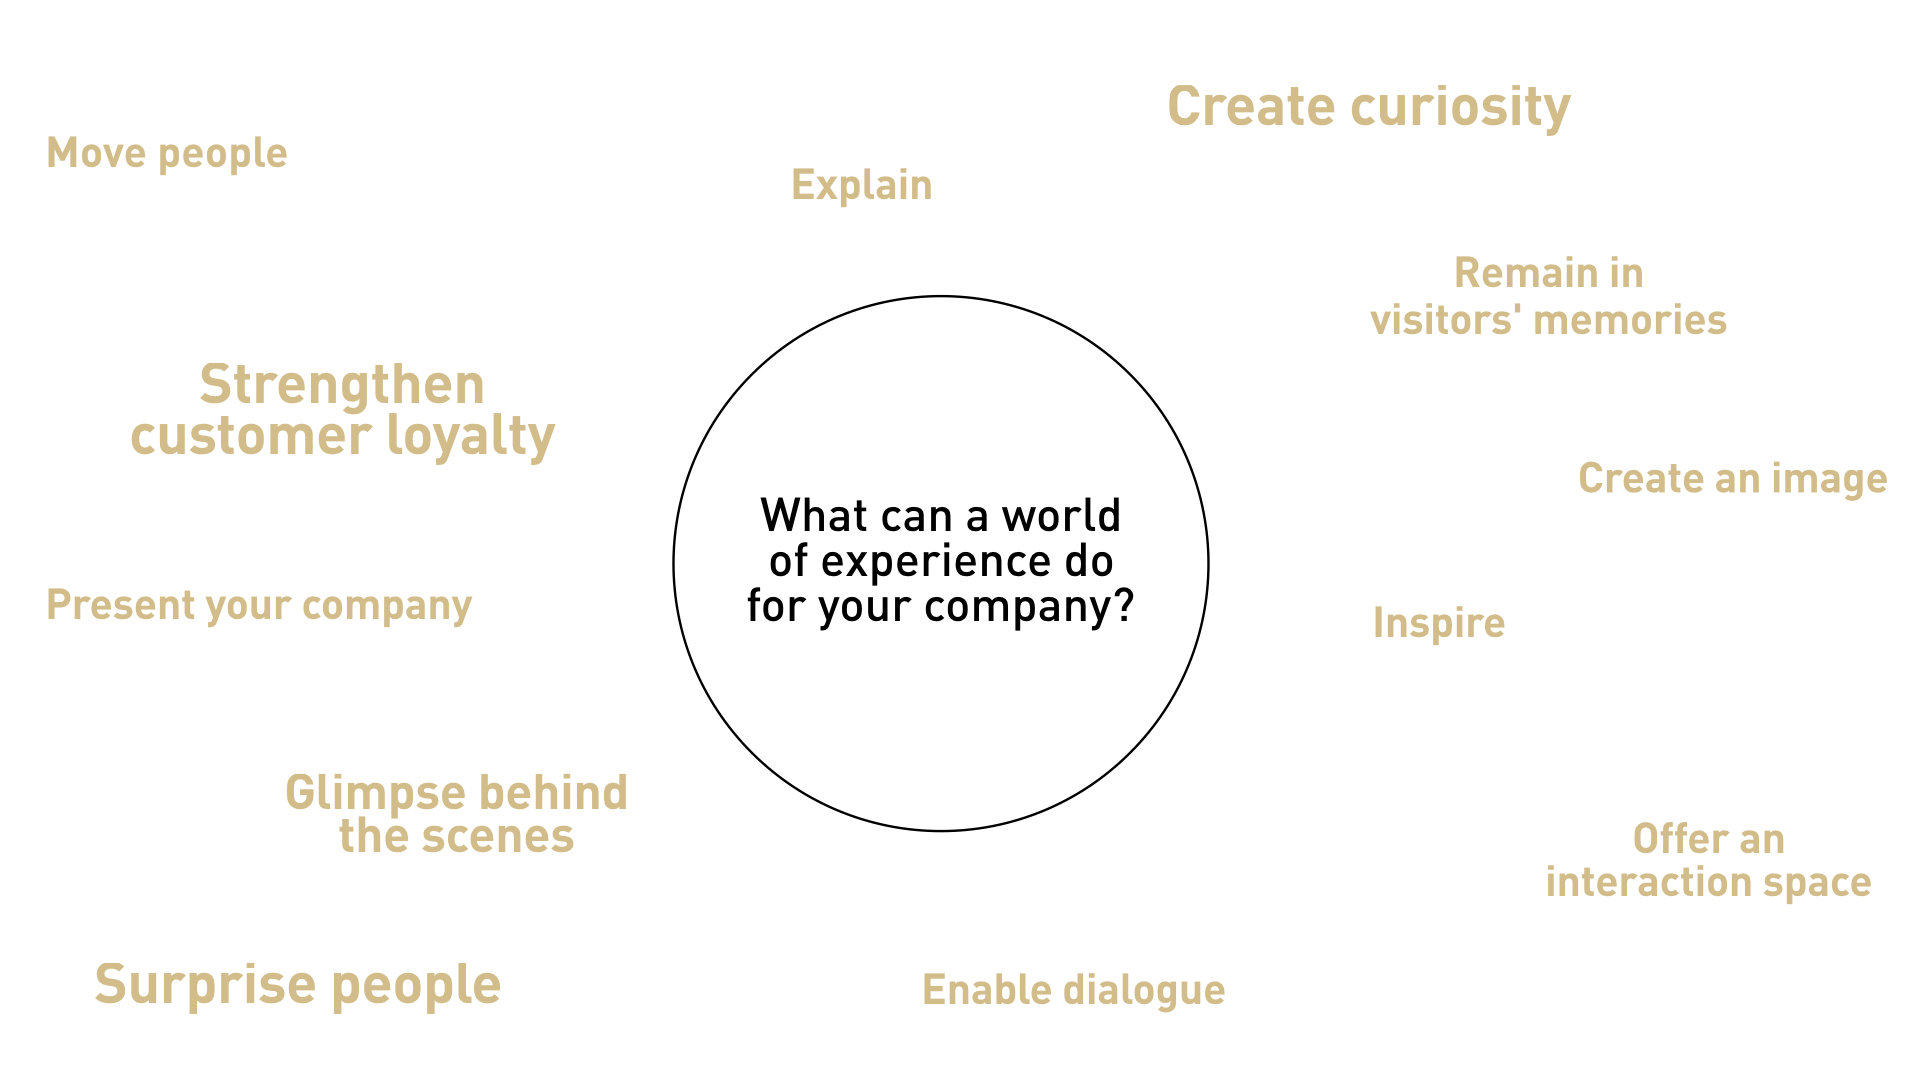 What can a world of experience do? It can do more than a product. A world of experience can inspire, be remembered, it gives a look behind the scenes, it stages, enables a dialog, engages in storytelling and much more.